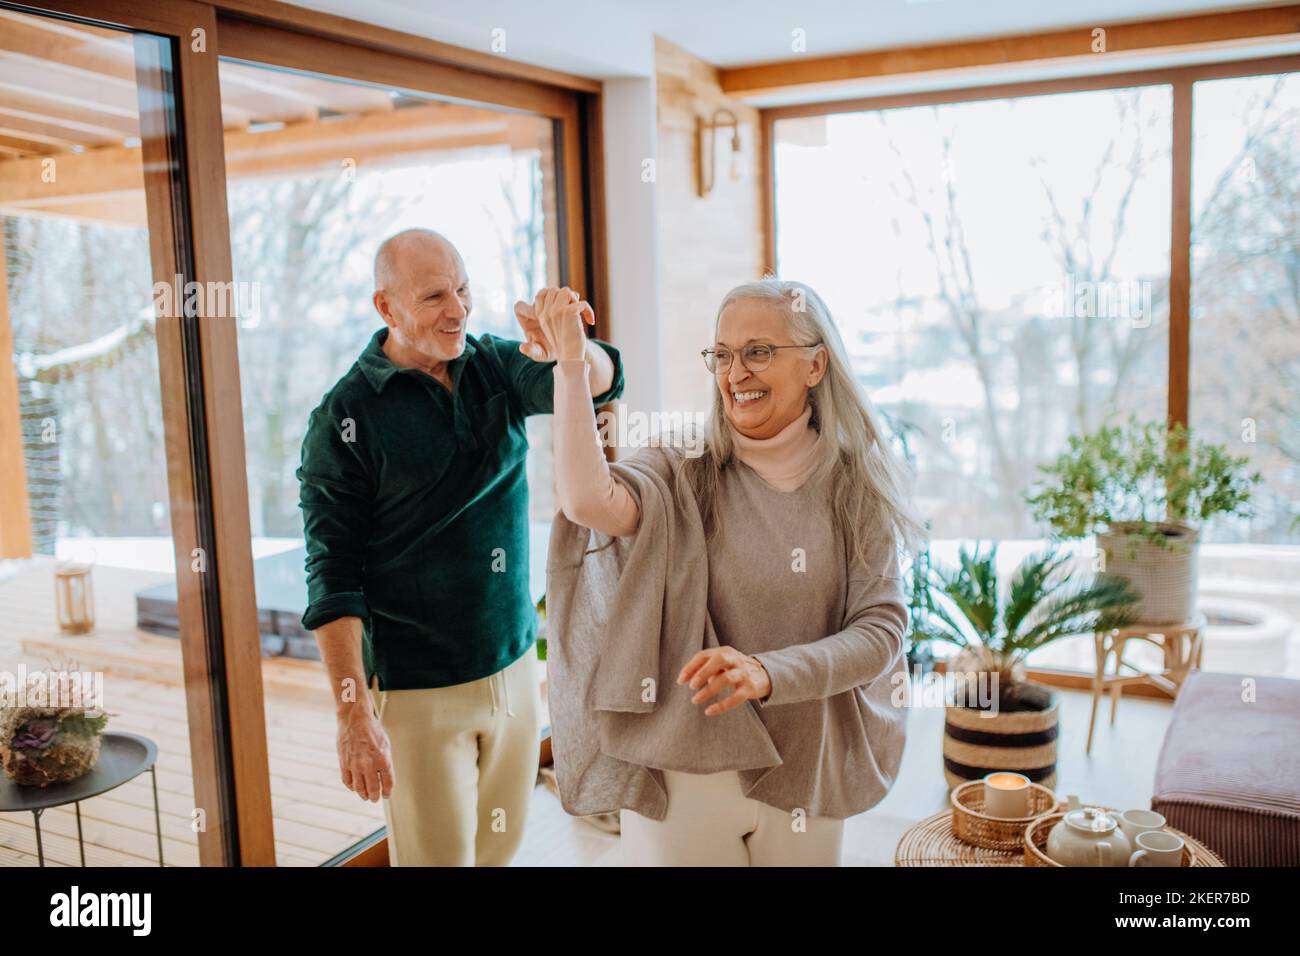 Senior couple in love dancing together in their modern living room. Stock Photo